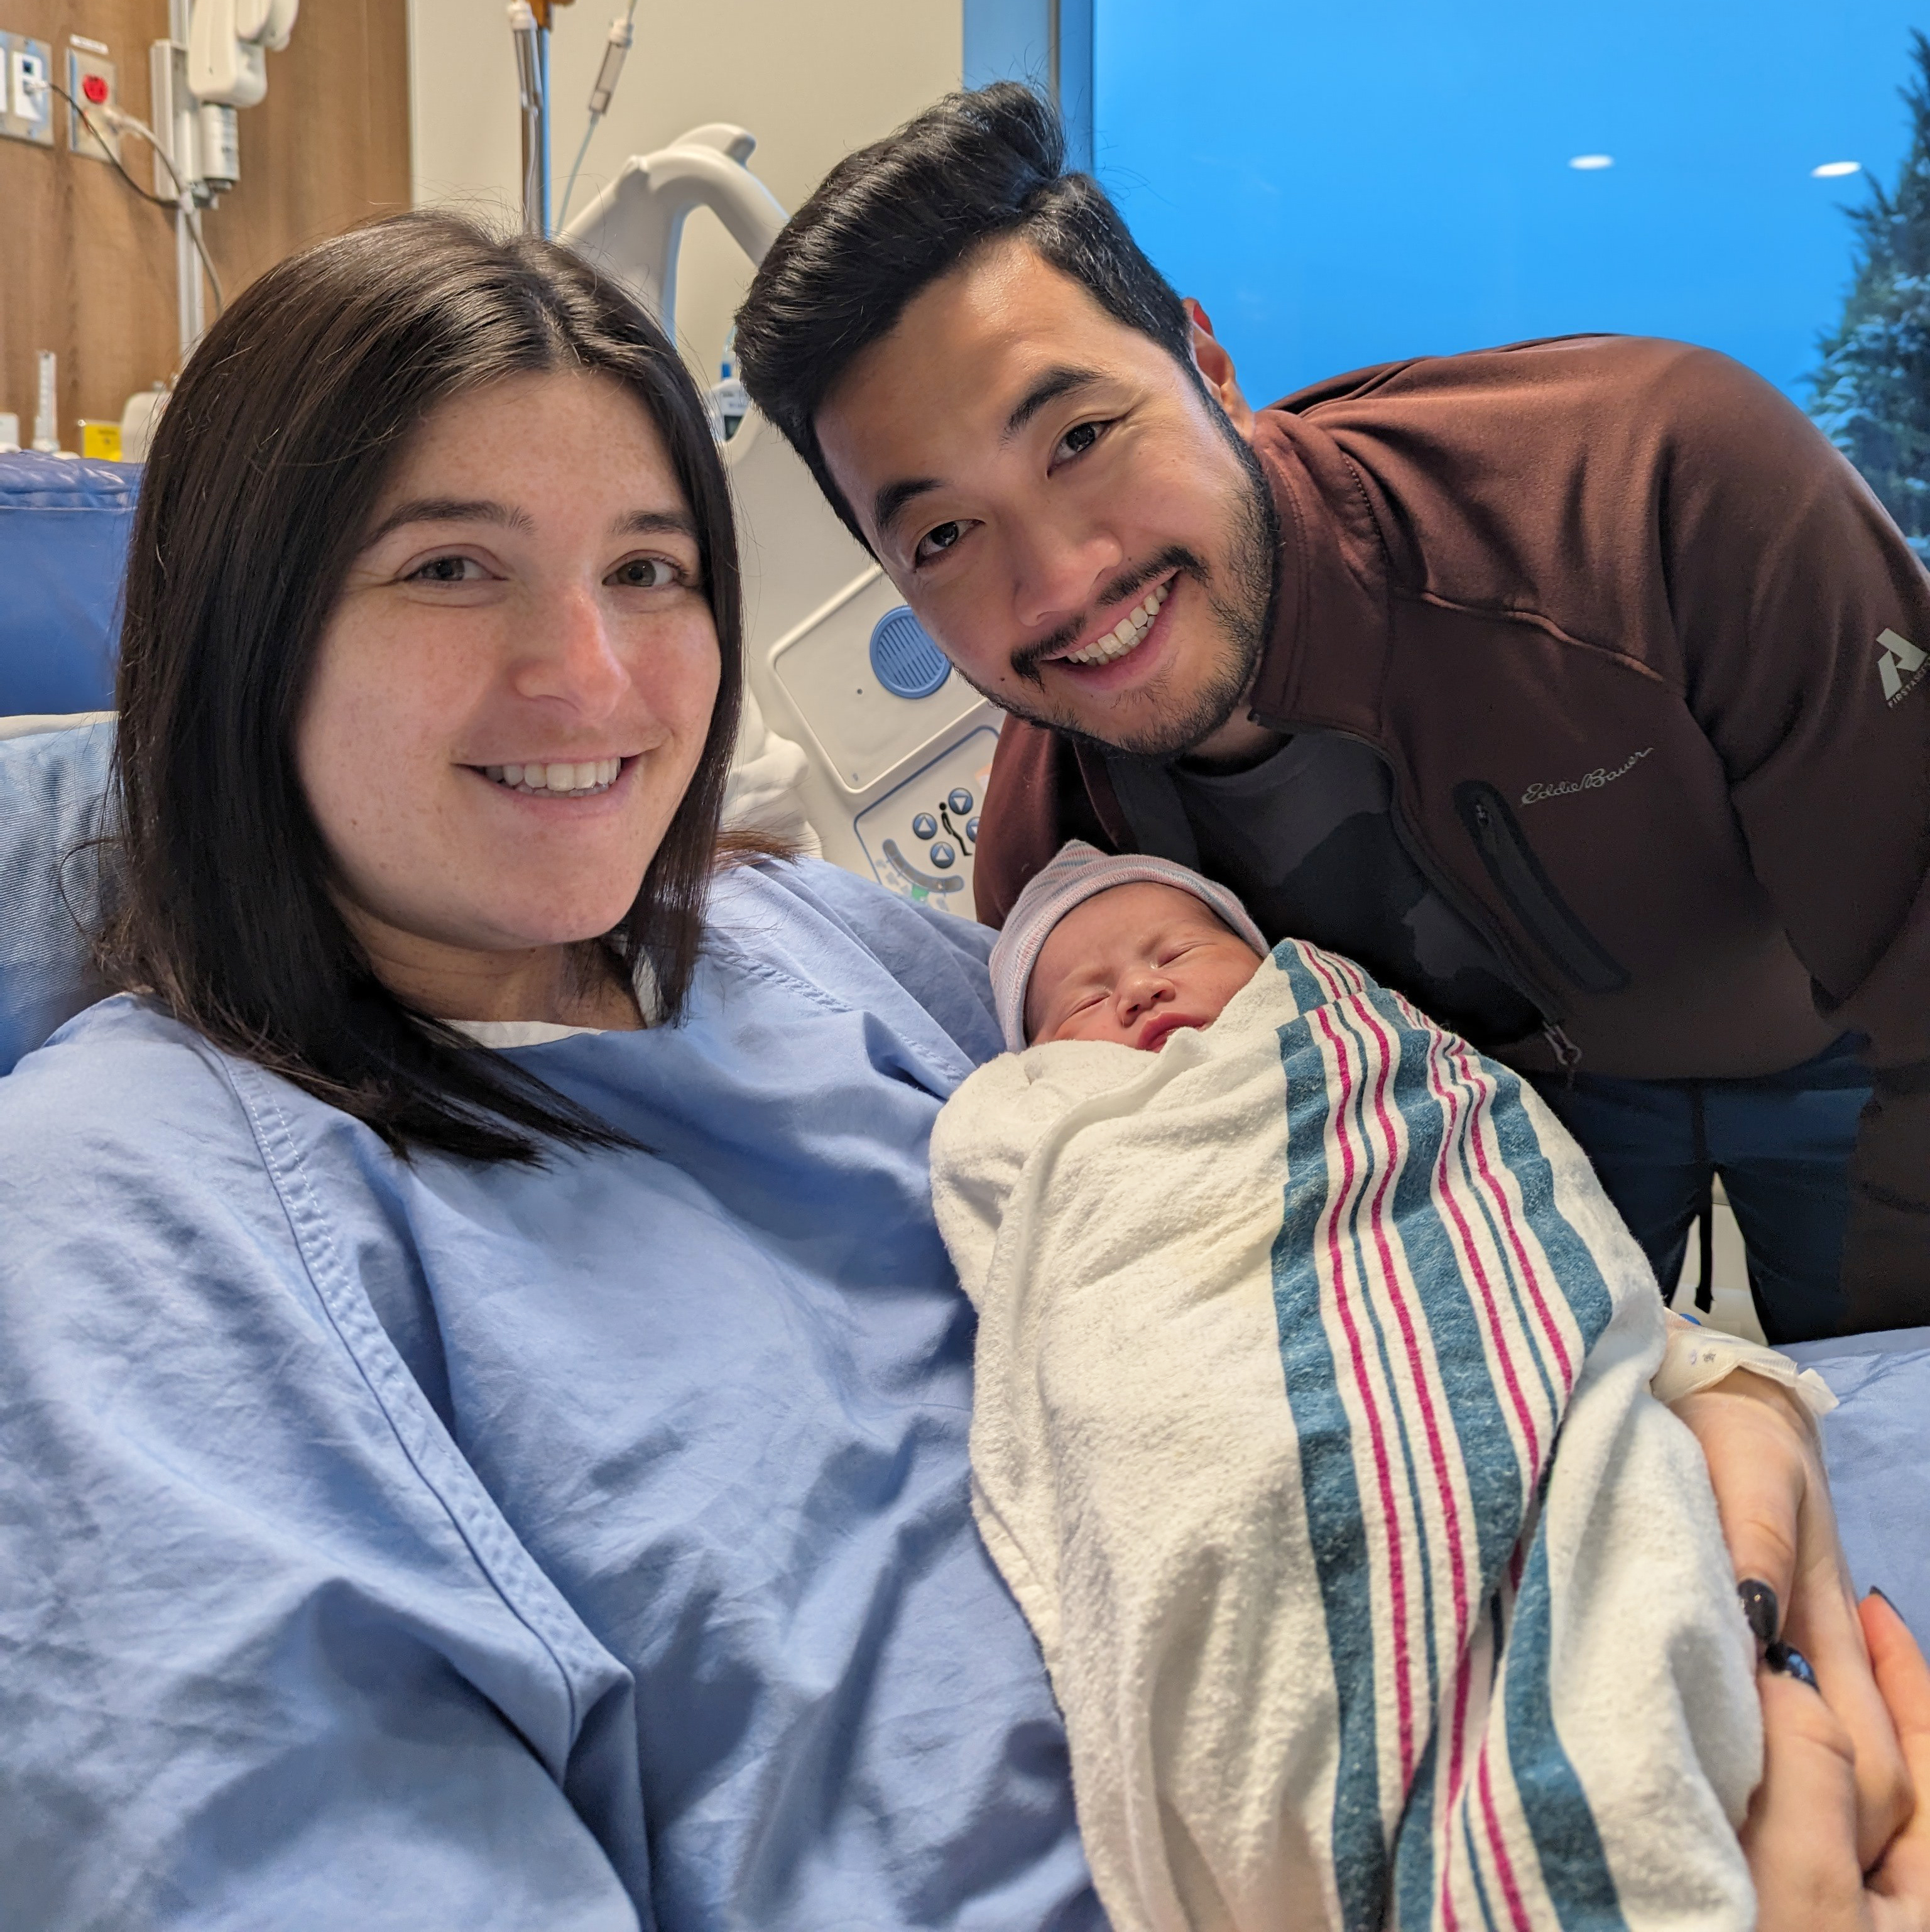 An image of new parents, Vic and Katie with their new baby. Katie is in the hospital bed with Vic standing beside her. Katie is holding the baby.